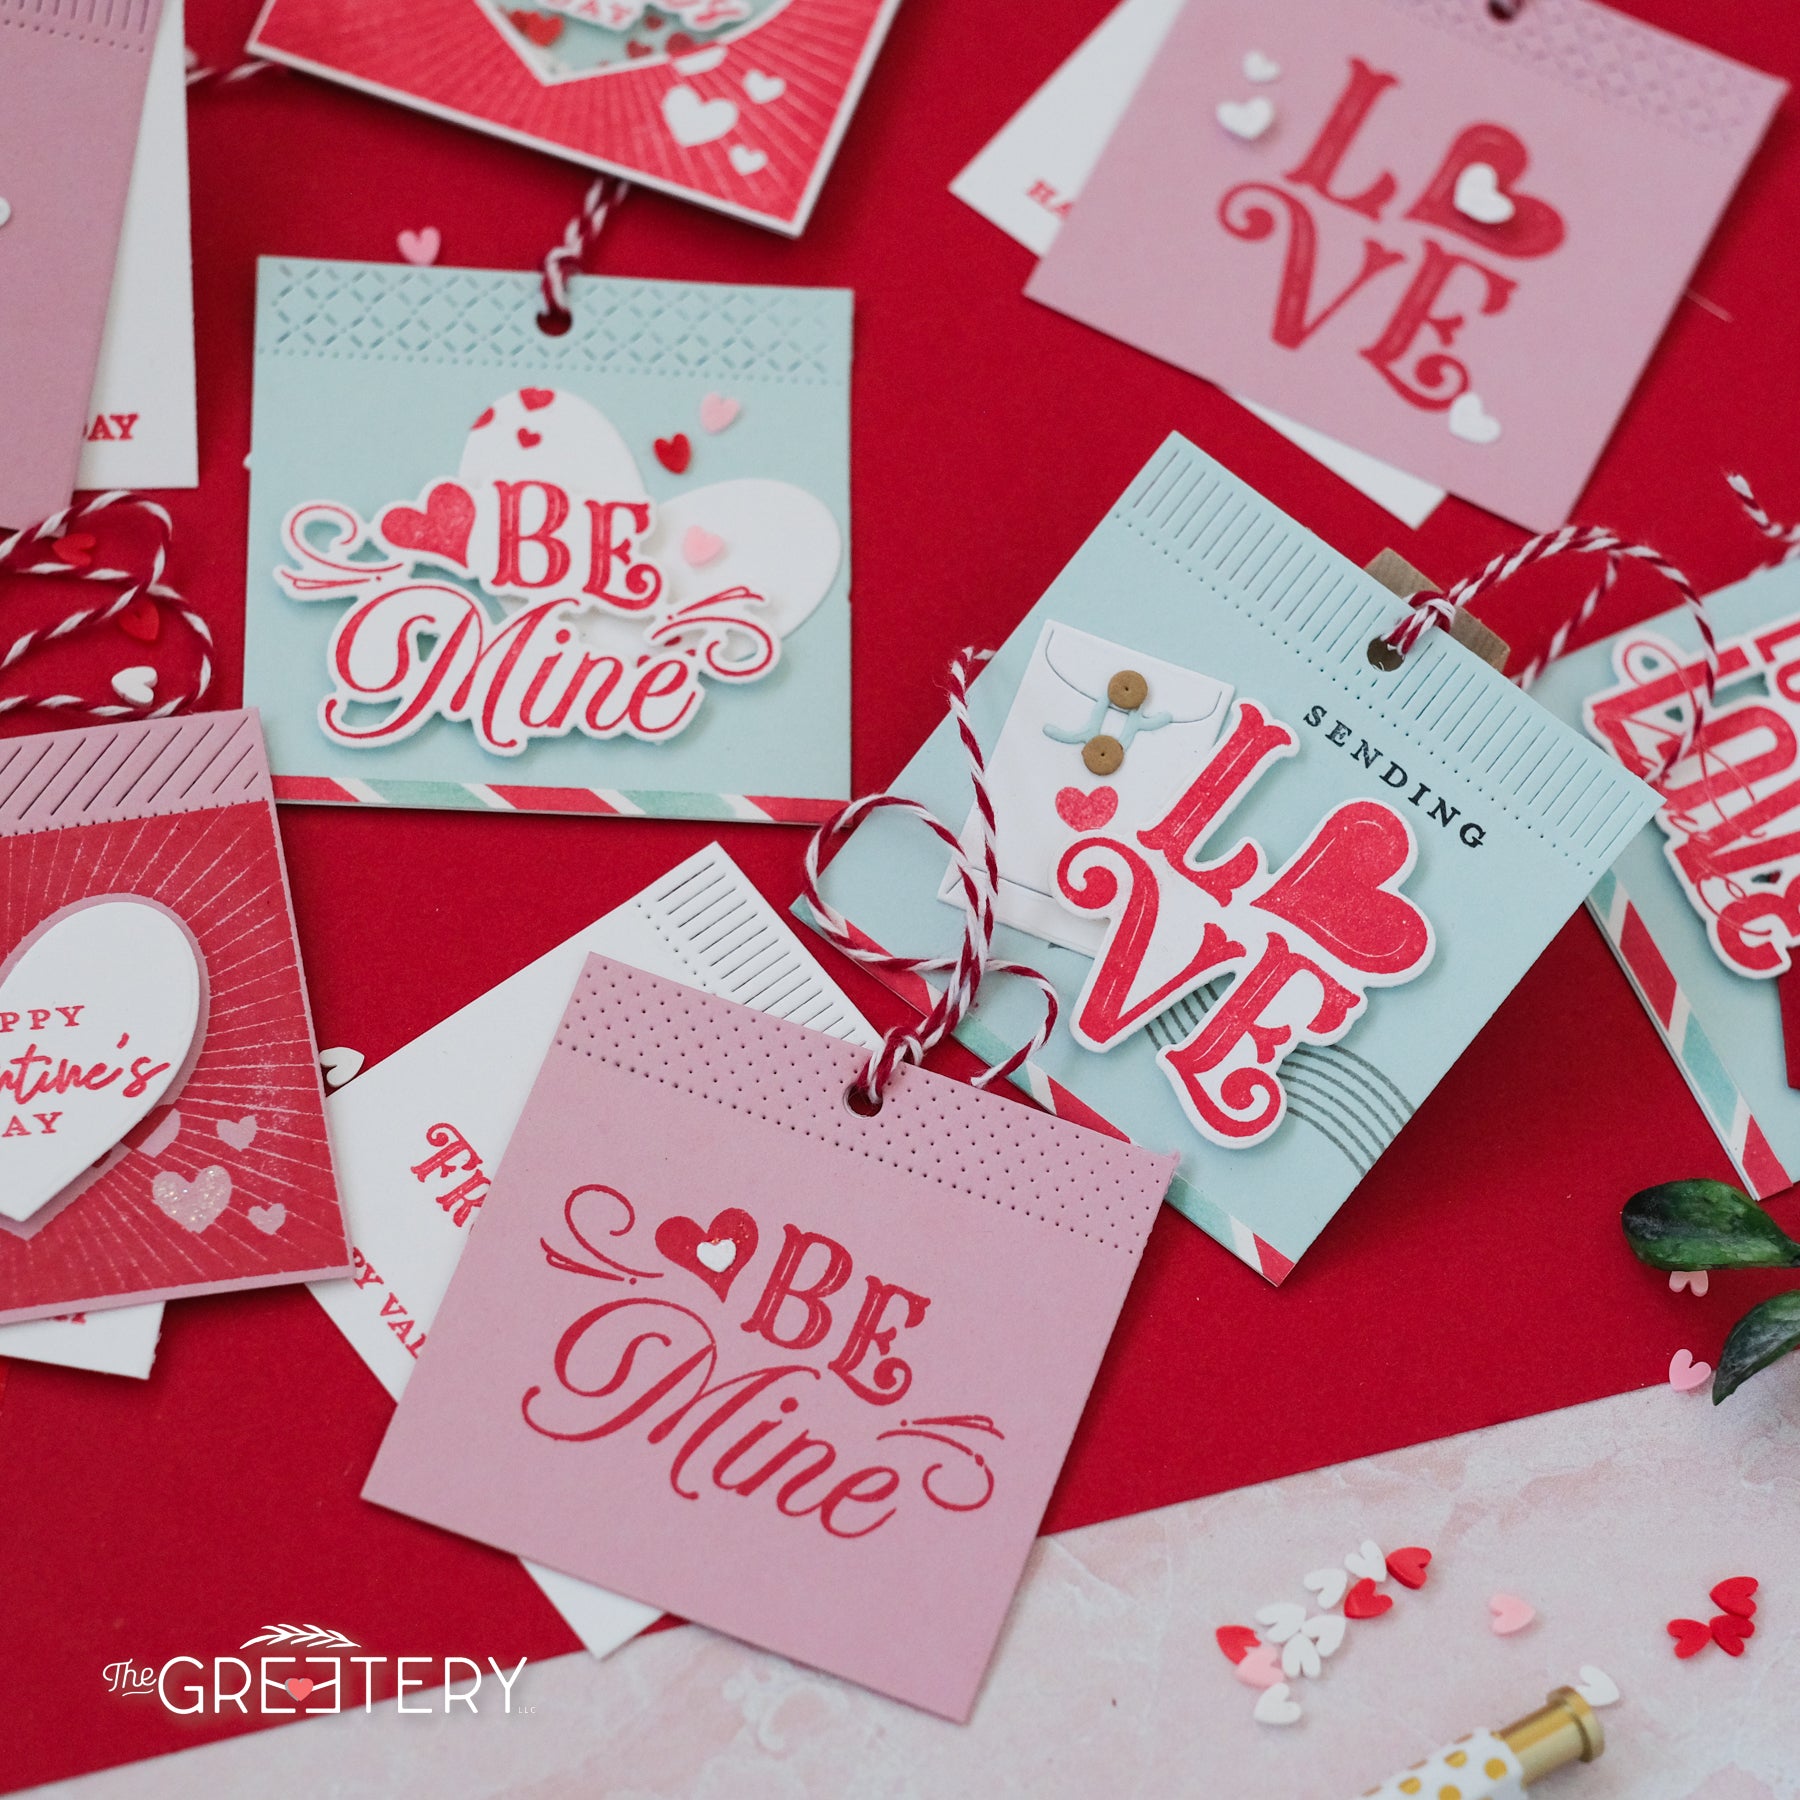 four-square-valentine-tags-the-greetery-6.jpg__PID:73831096-fa03-4254-a18b-3218c24d7cf1